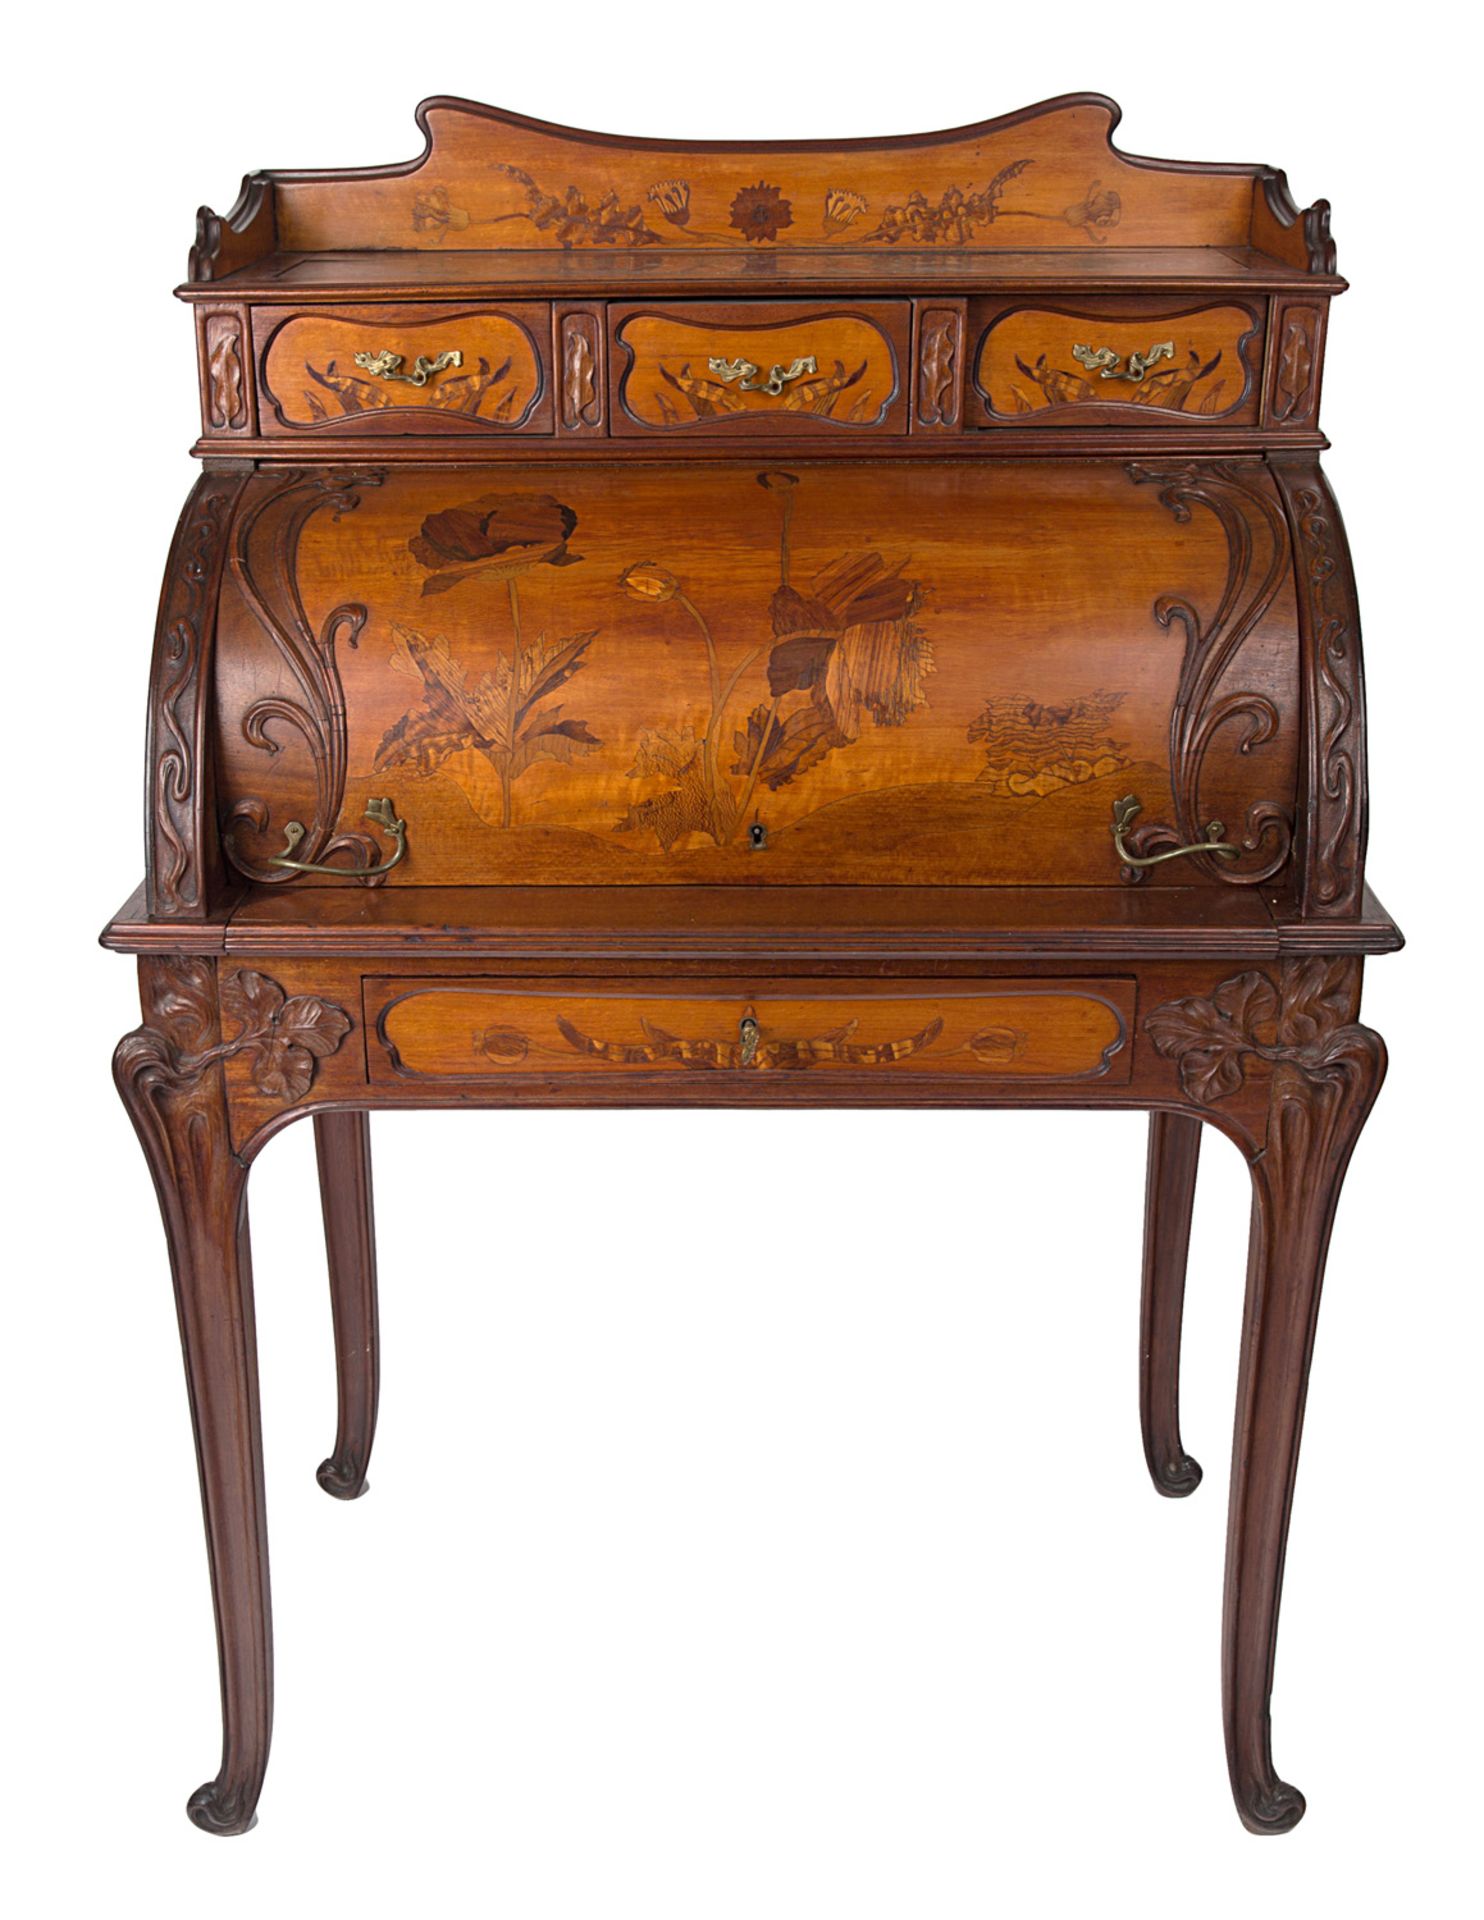 AN ART NOUVEAU CYLINDER MARQUETRY WRITING TABLE, CIRCA 1900